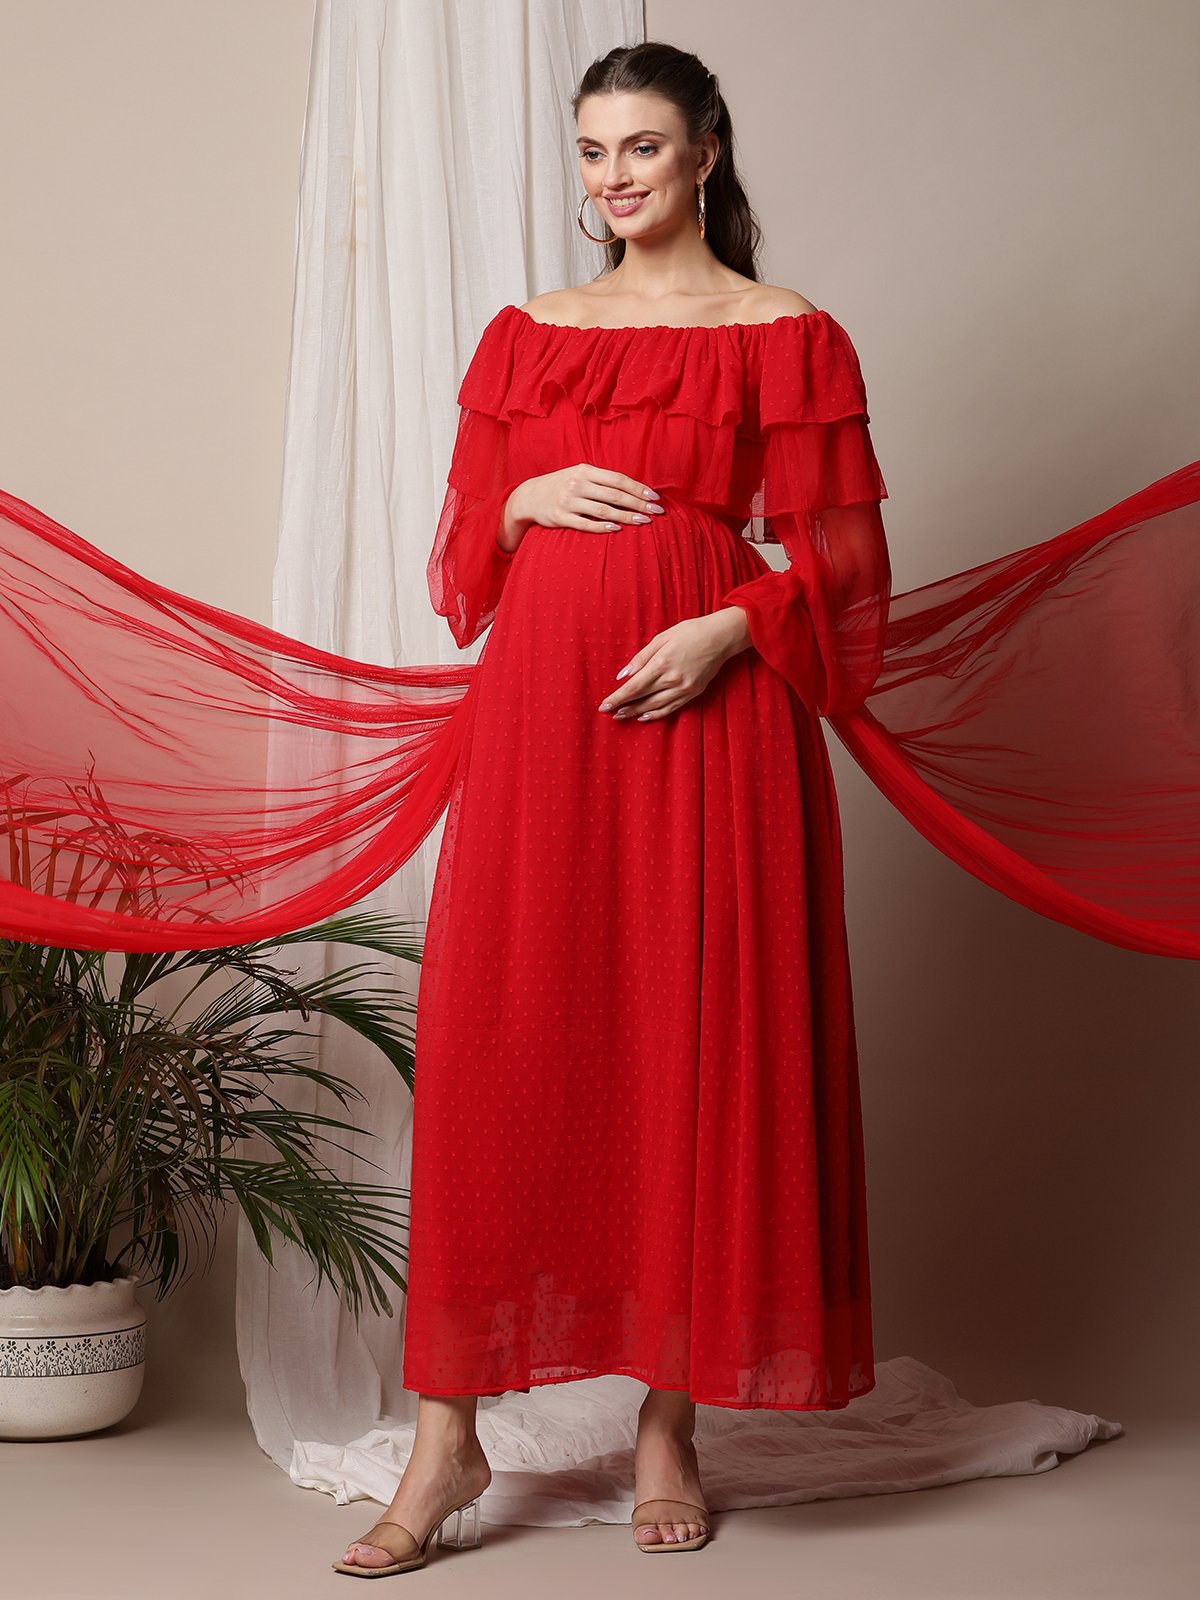 Fashion Off Shoulder Long Sleeve Maternity Dress Baby Shower Photo Props  Pregnant Gown